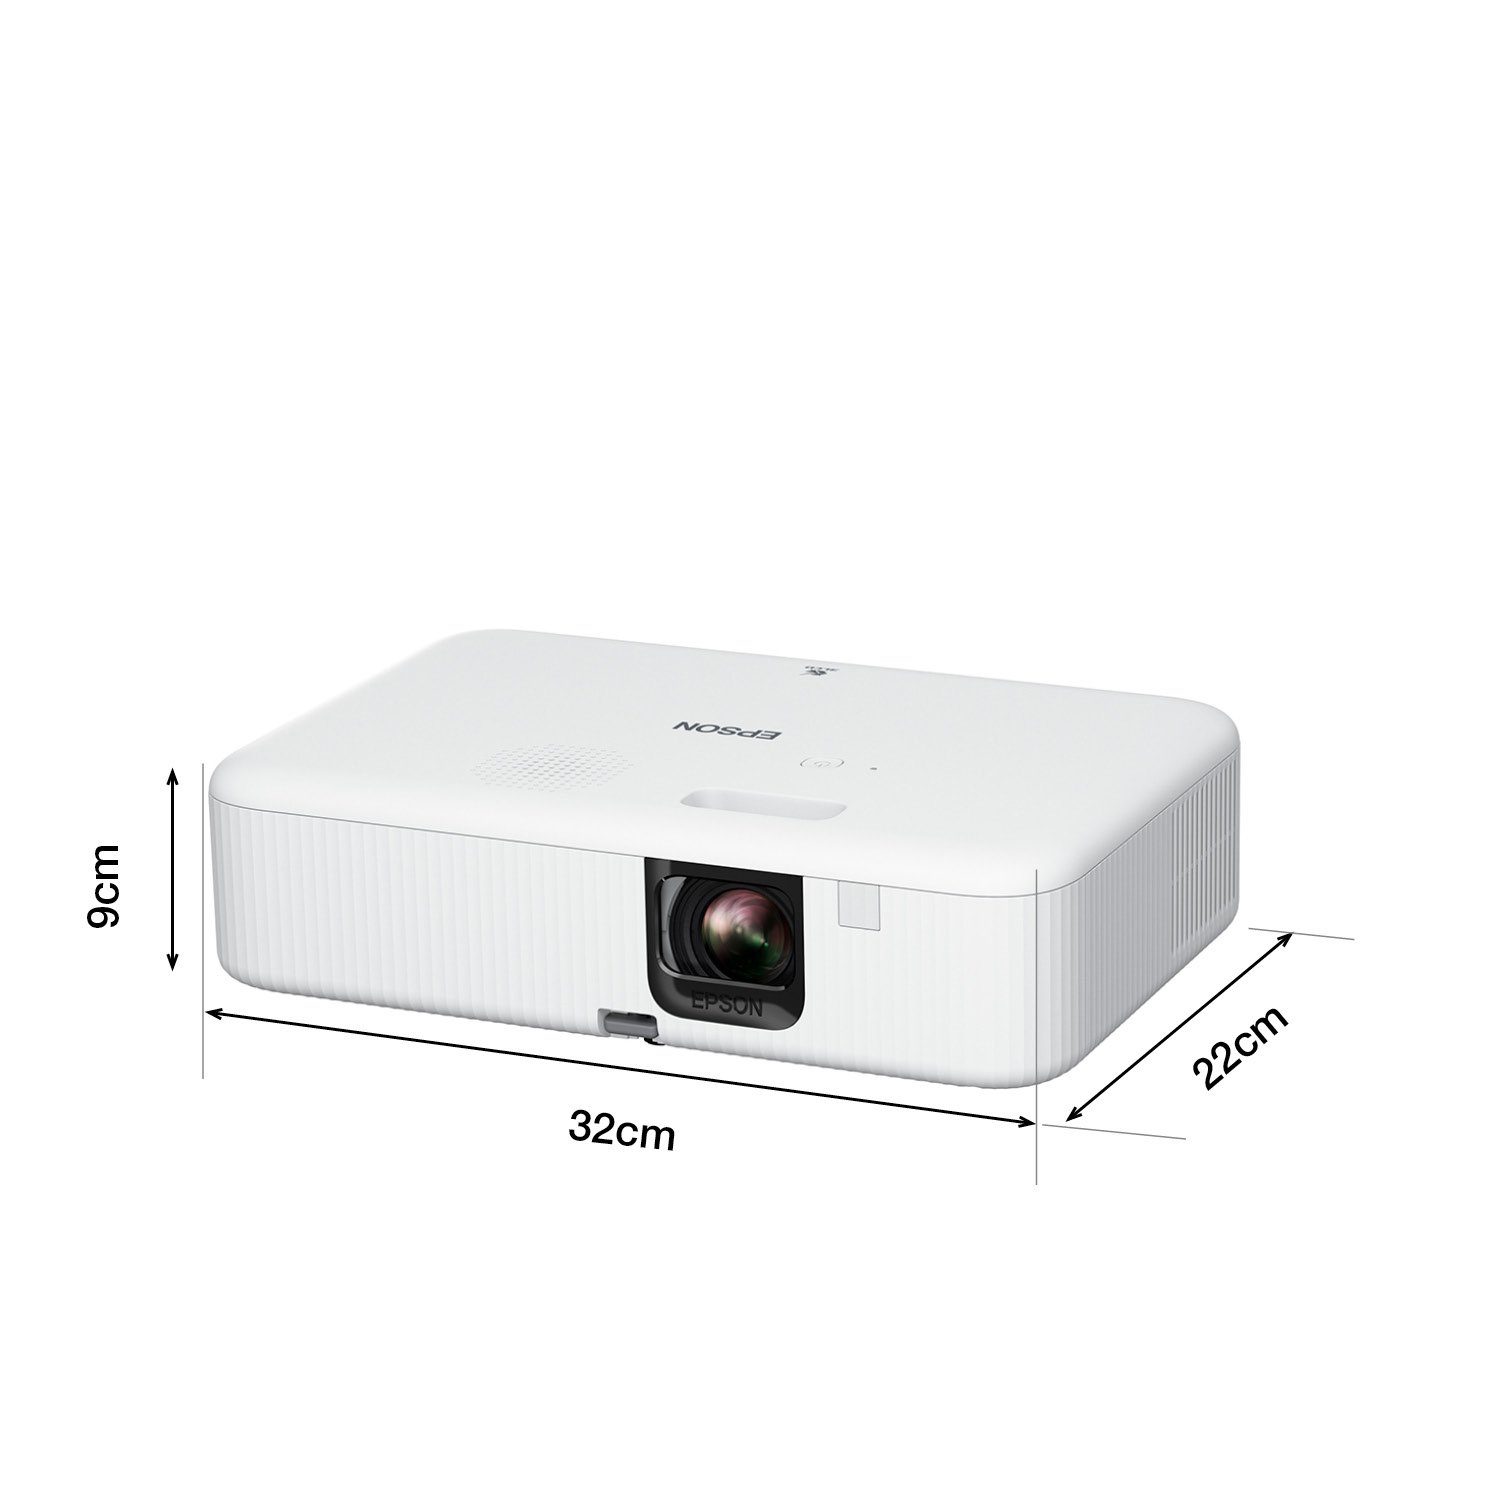 lm, x Beamer :1, px) 1920 Epson CO-FH02 (3000 1080